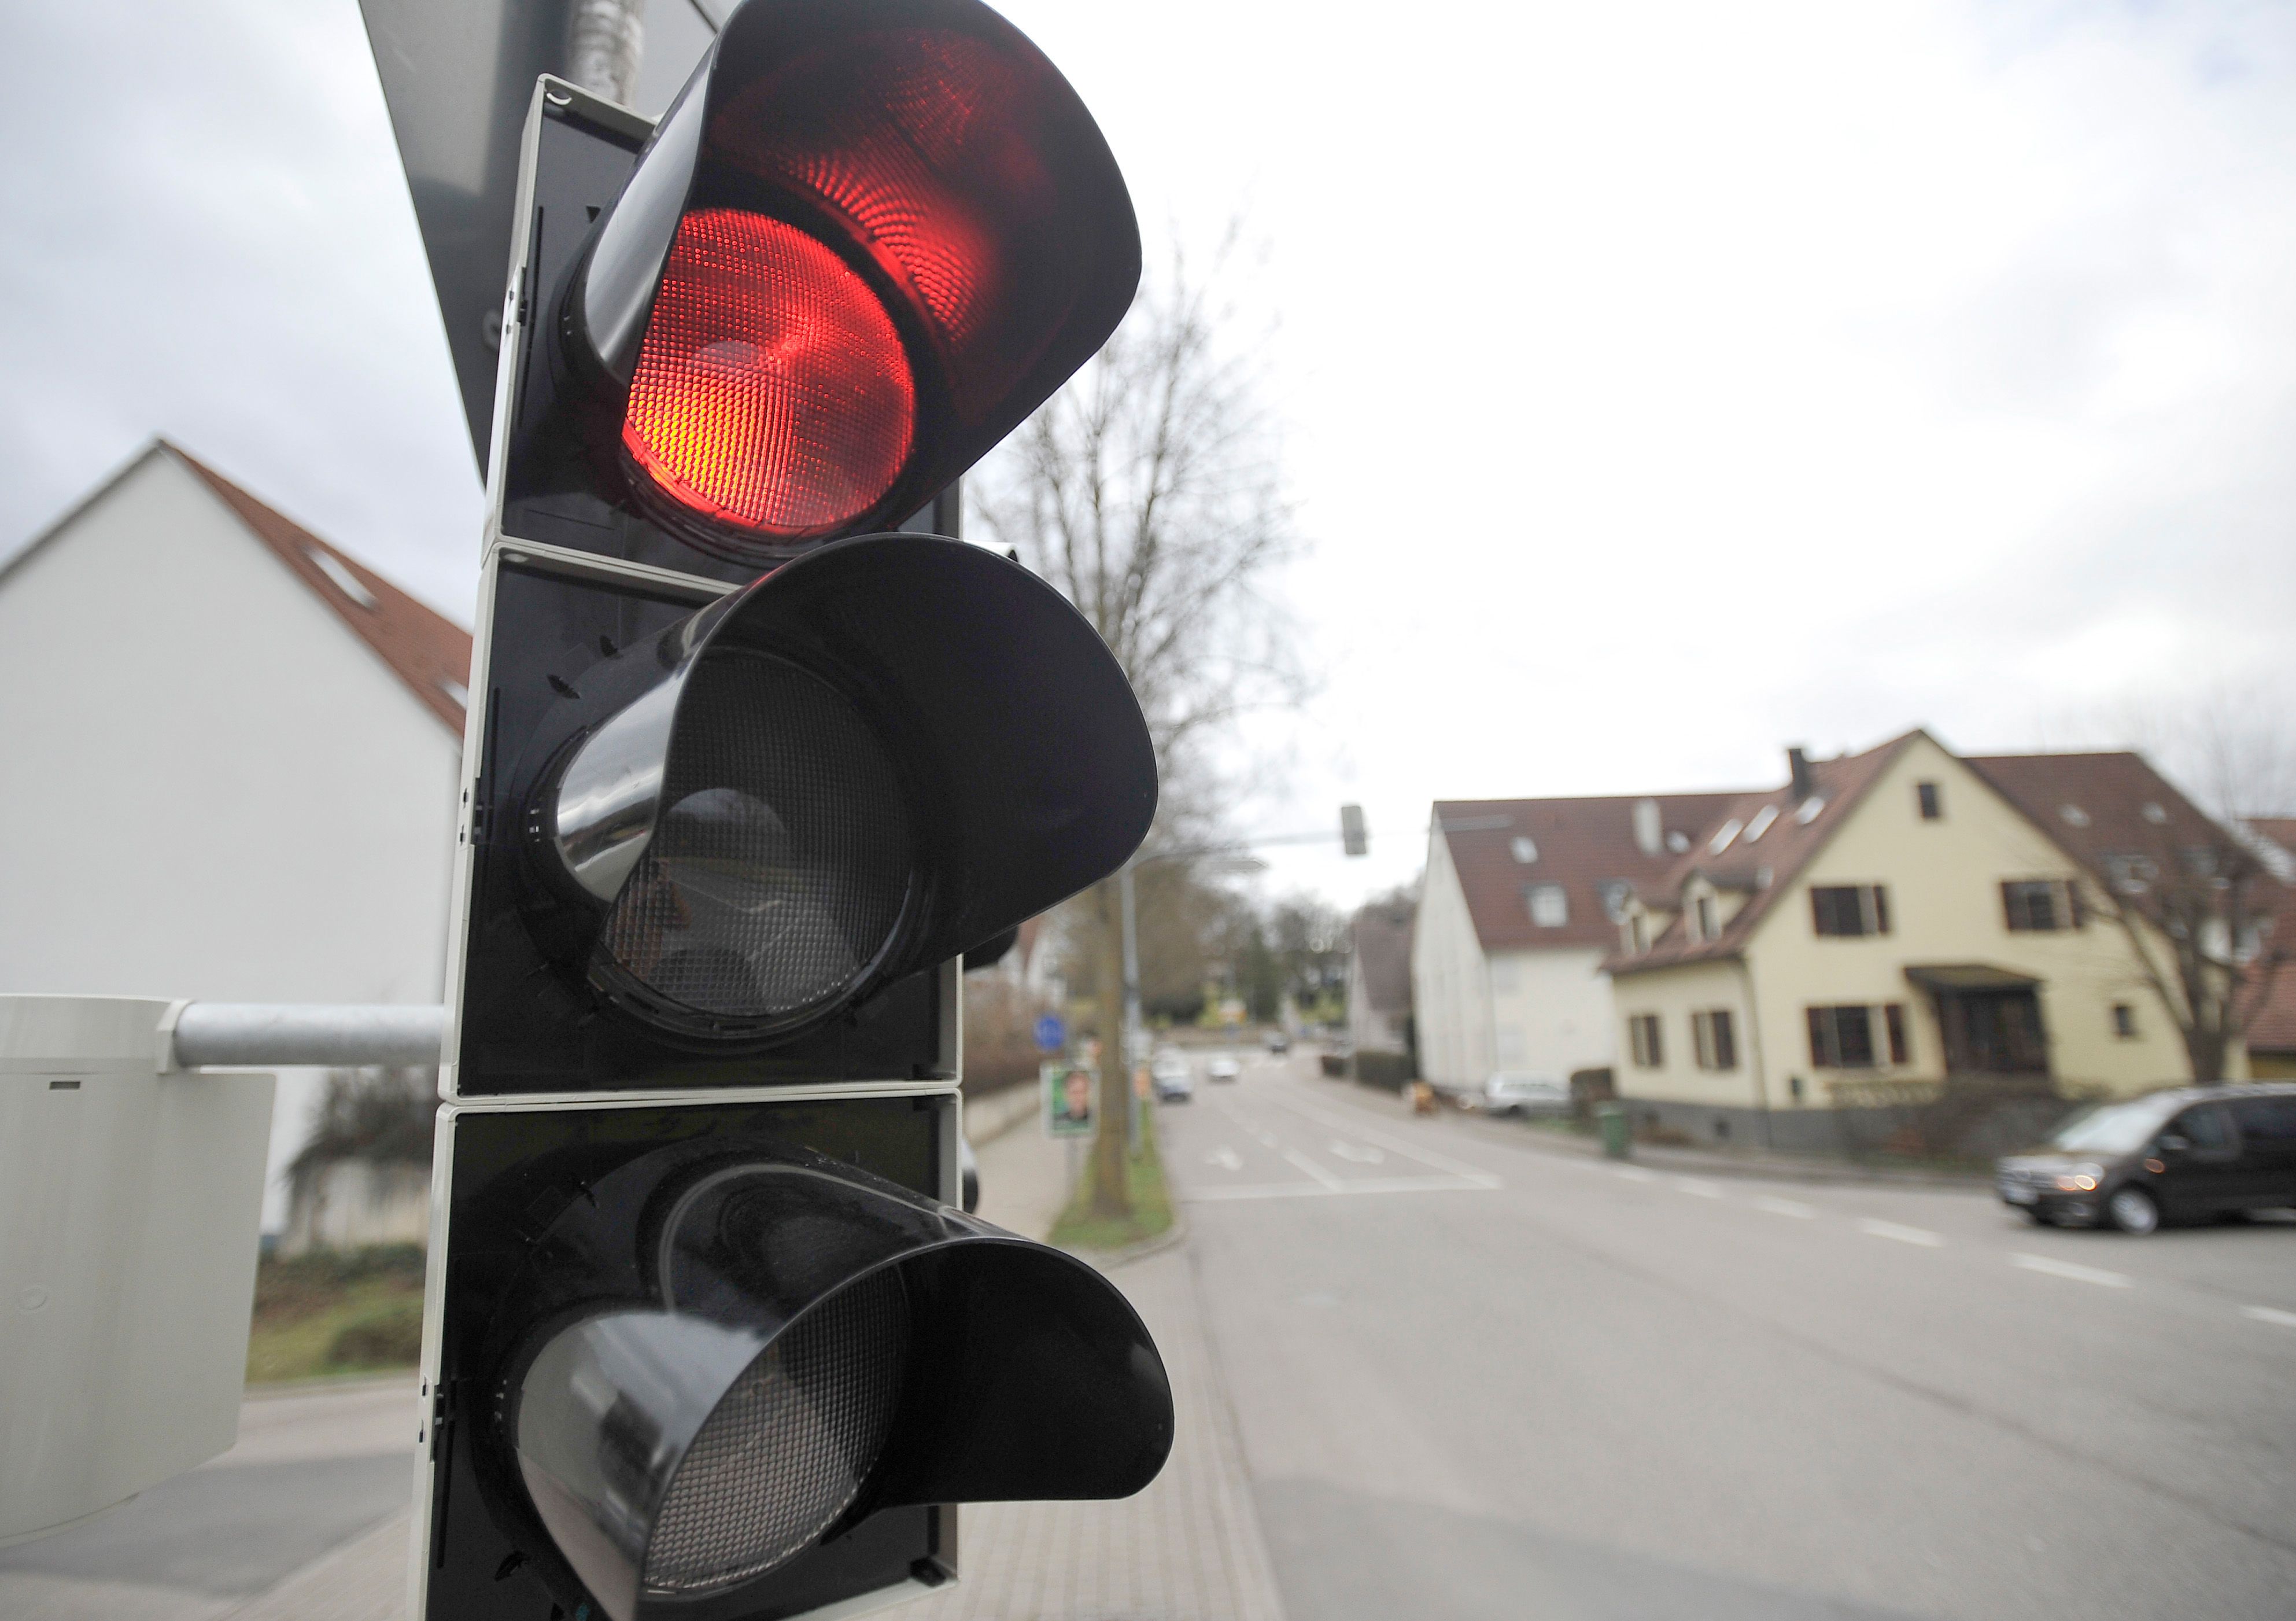 The world's most energy-efficient traffic light, Press, Company